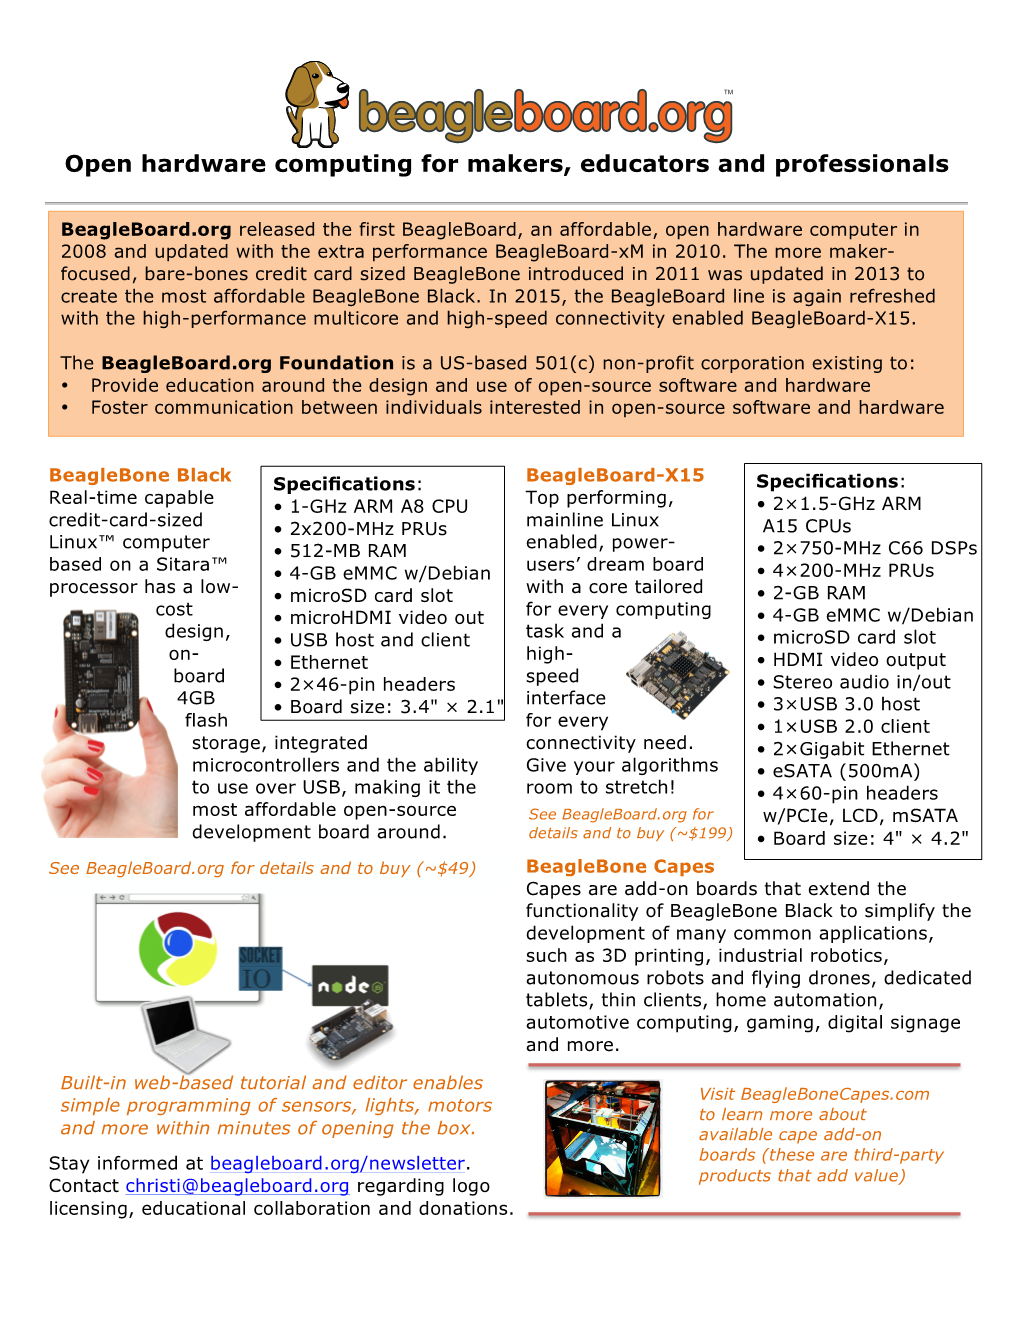 Open Hardware Computing for Makers, Educators and Professionals